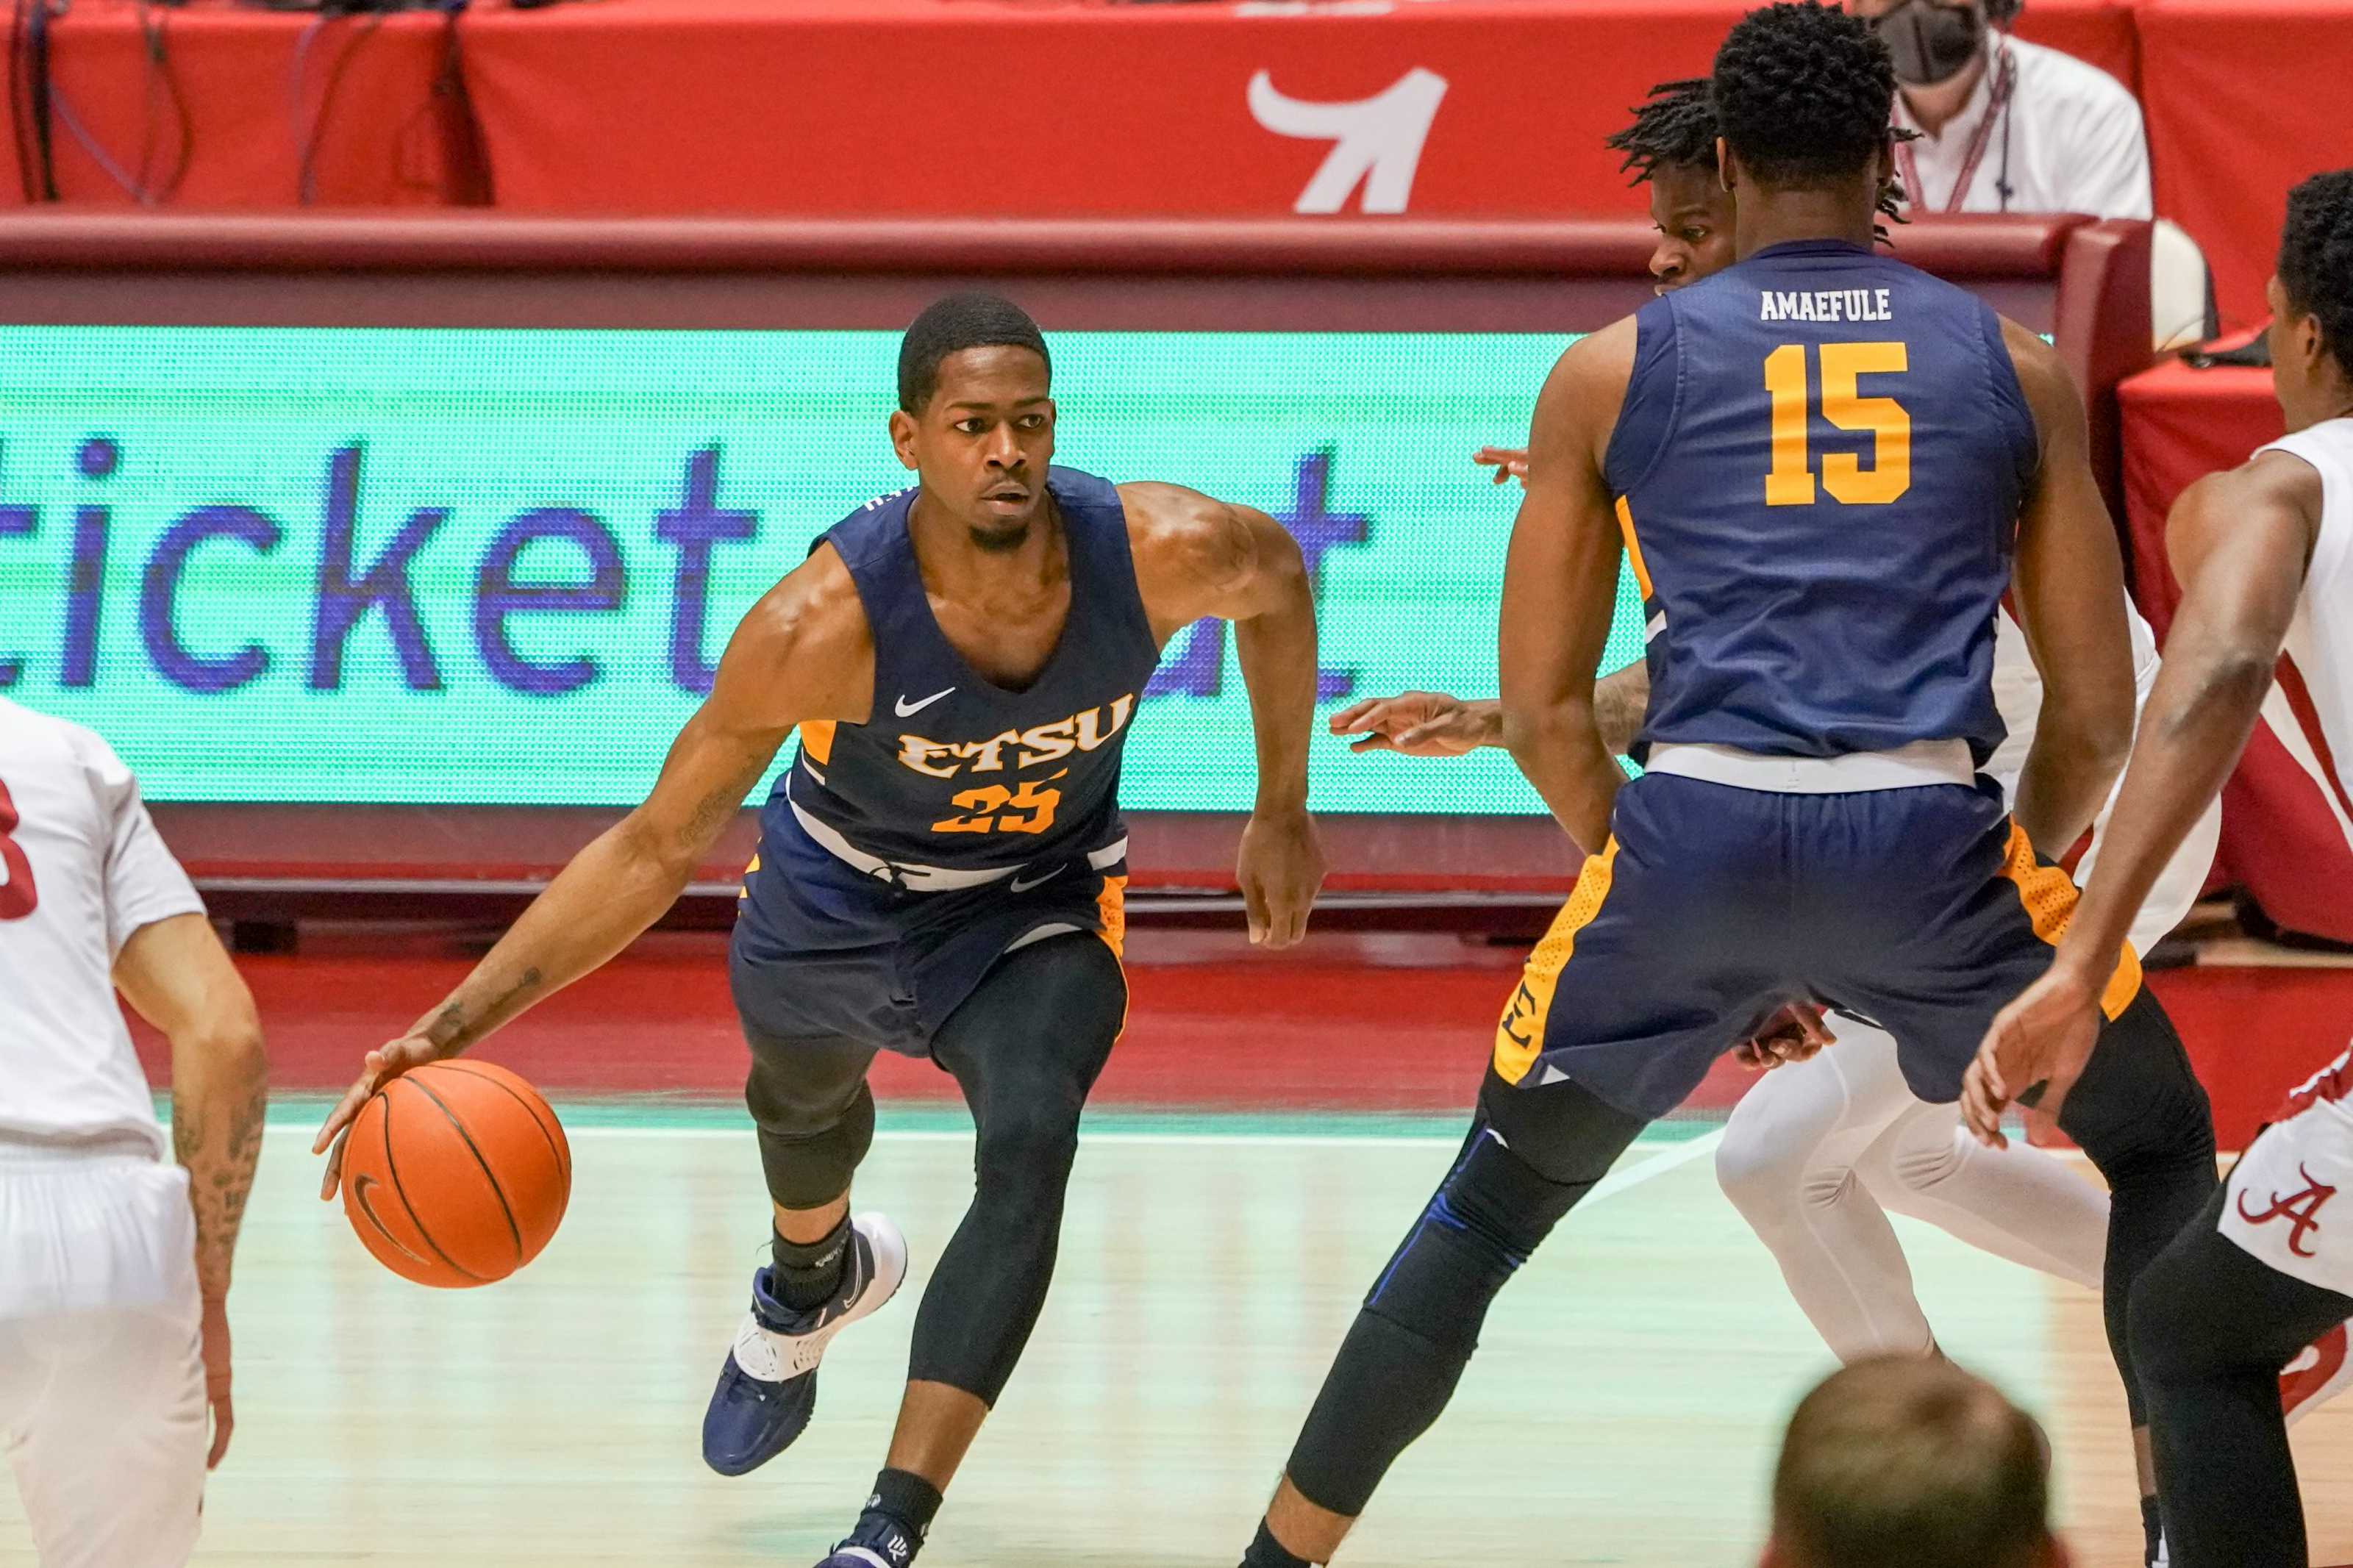 SoCon Basketball 2021 Conference Tournament preview and predictions